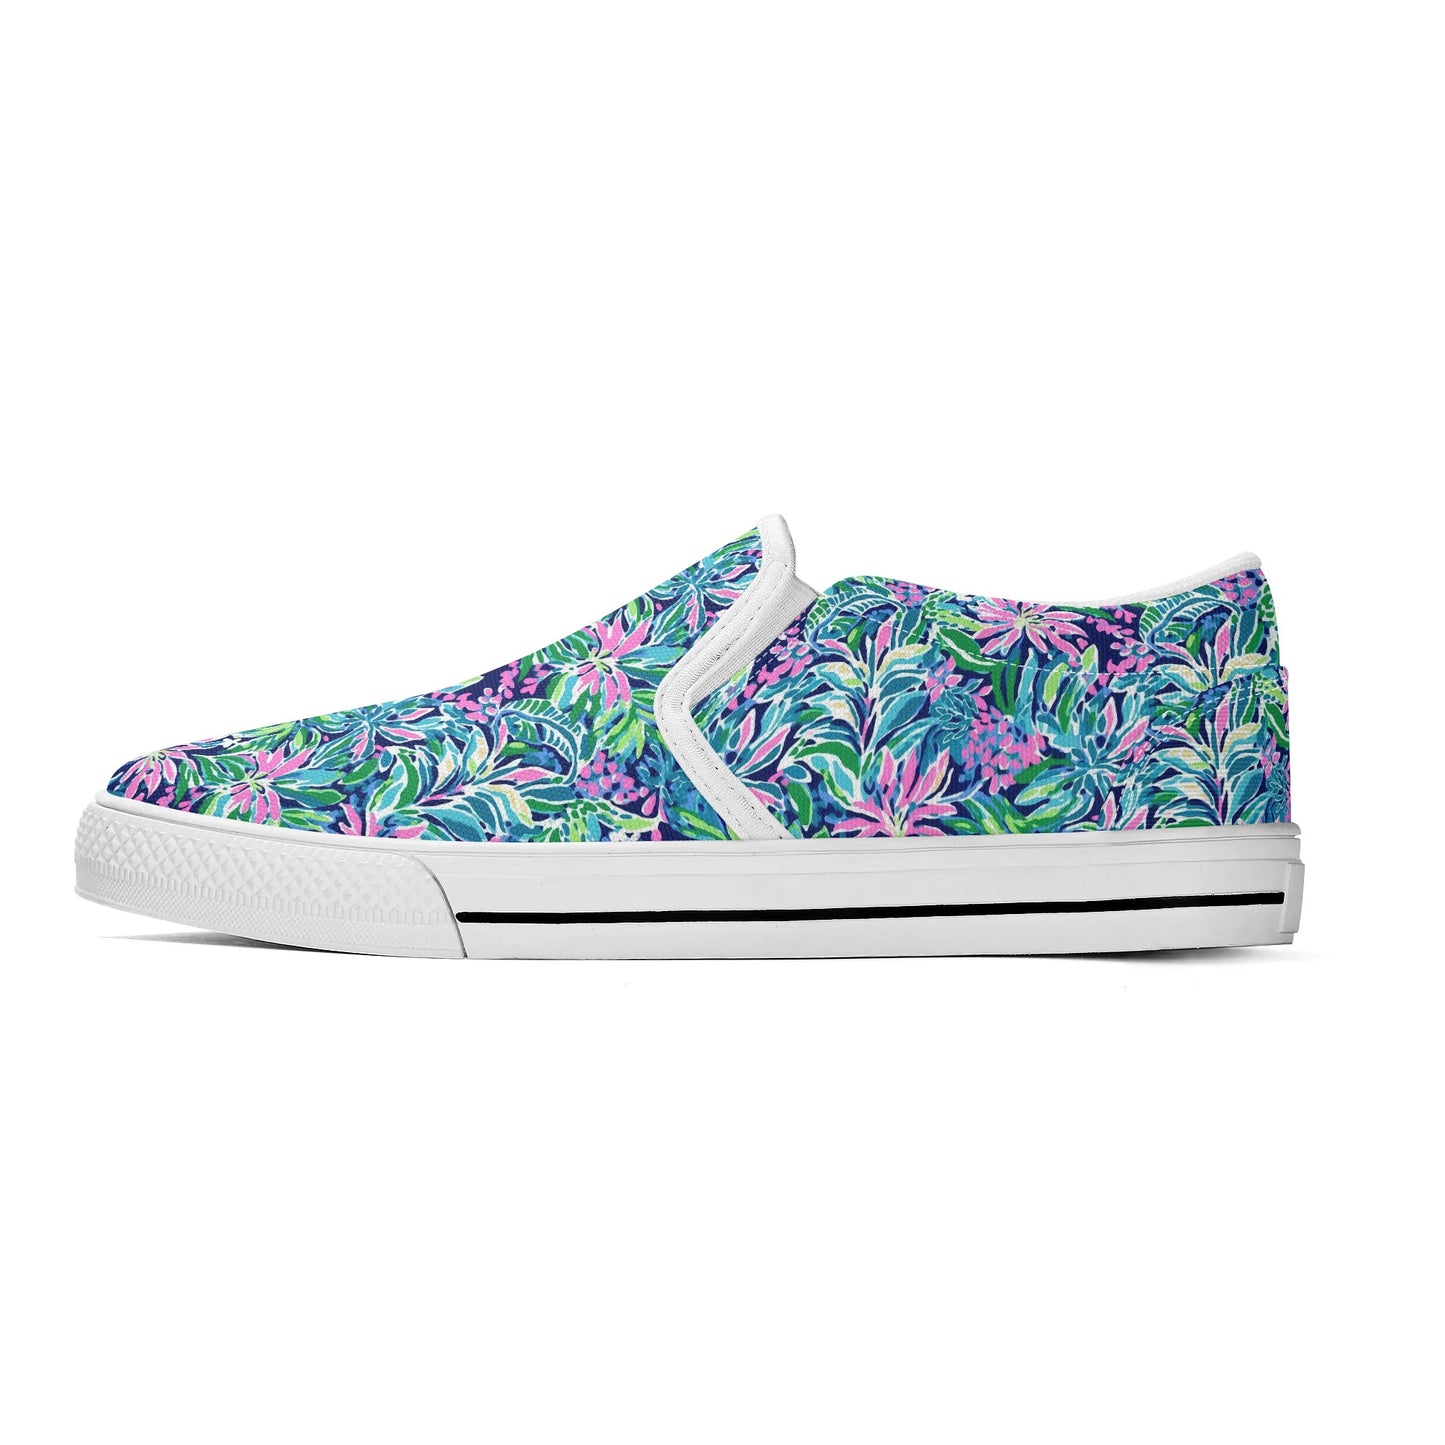 Seaside Blossoms: Coastal Spring Flowers in Pink, Green, and Navy Watercolors Womens Canvas Slip On Shoes US5-US12